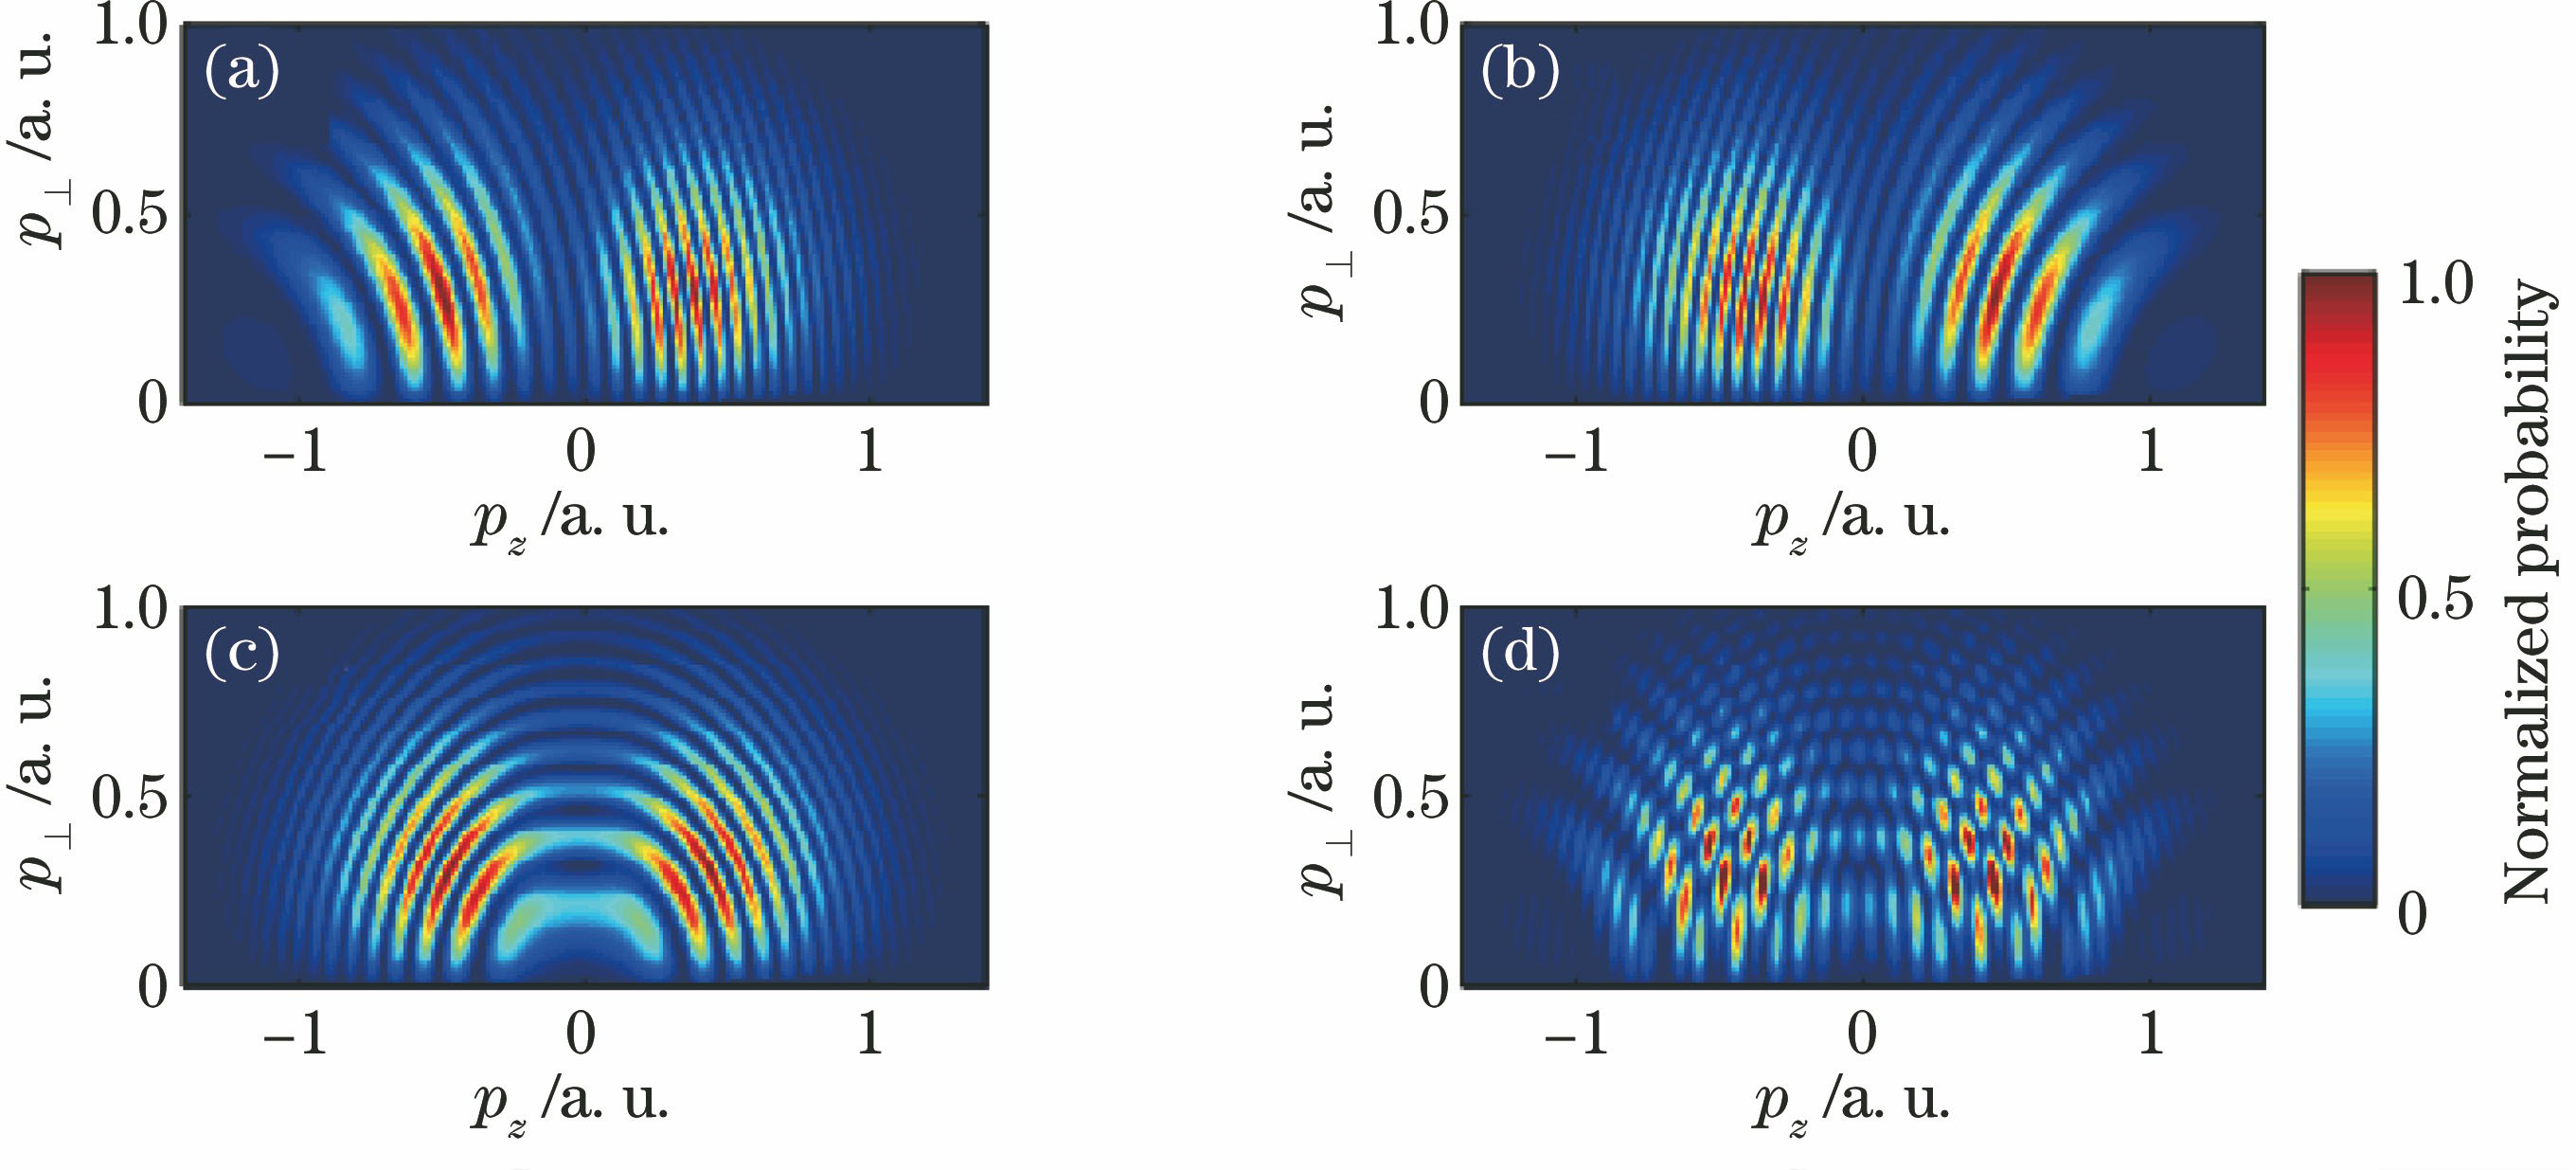 2D momentum spectra of H atom with SFA method. (a) A window and C window; (b) A window and B window; (c) B window and C window; (d) A window, B window, and C window